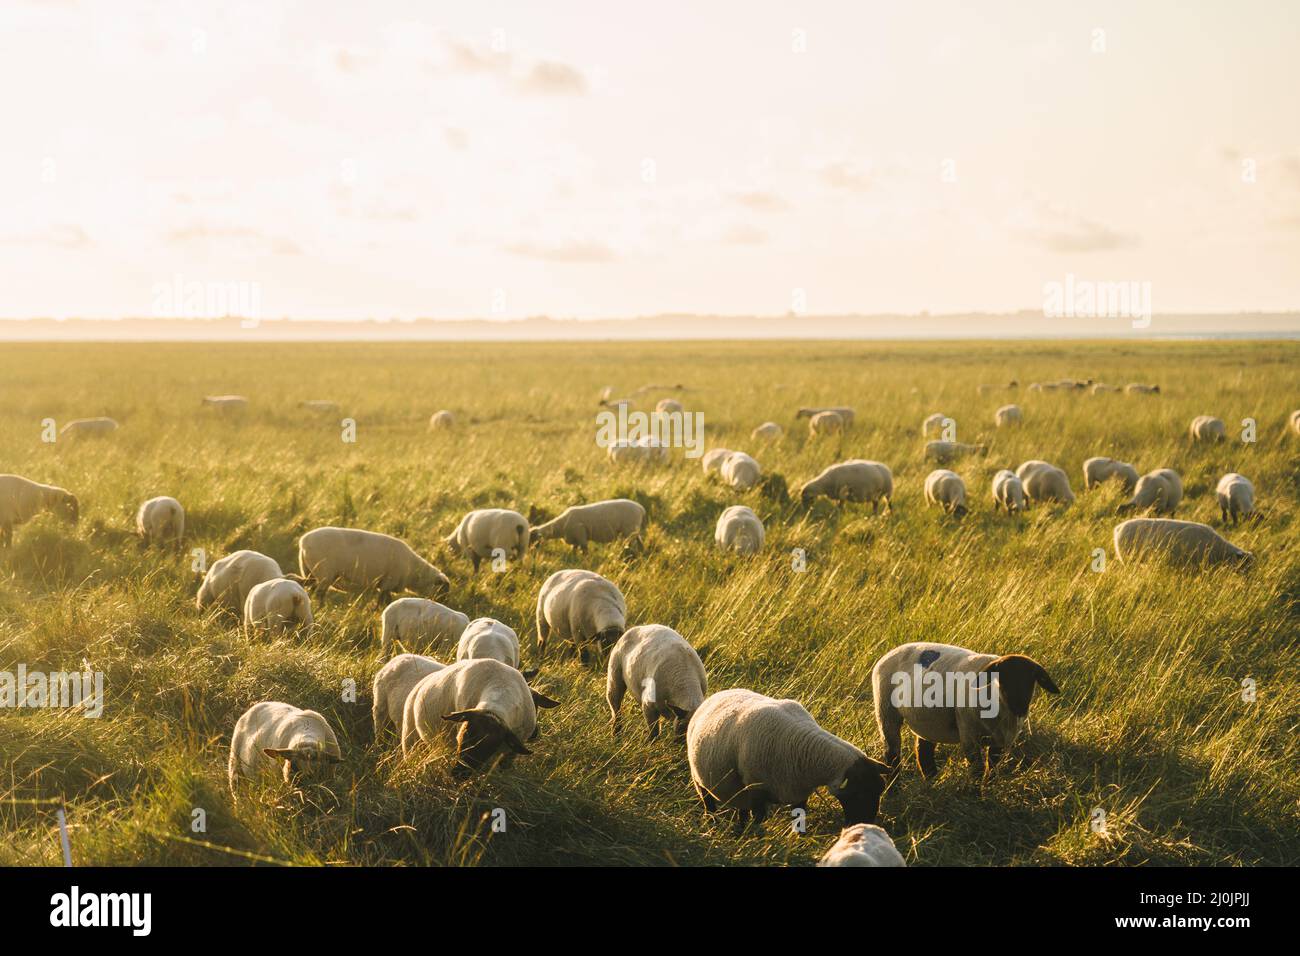 Agriculture, farming and livestock in north France Bretagne region. Flock of sheep graze in field on shores atlantic ocean in fr Stock Photo